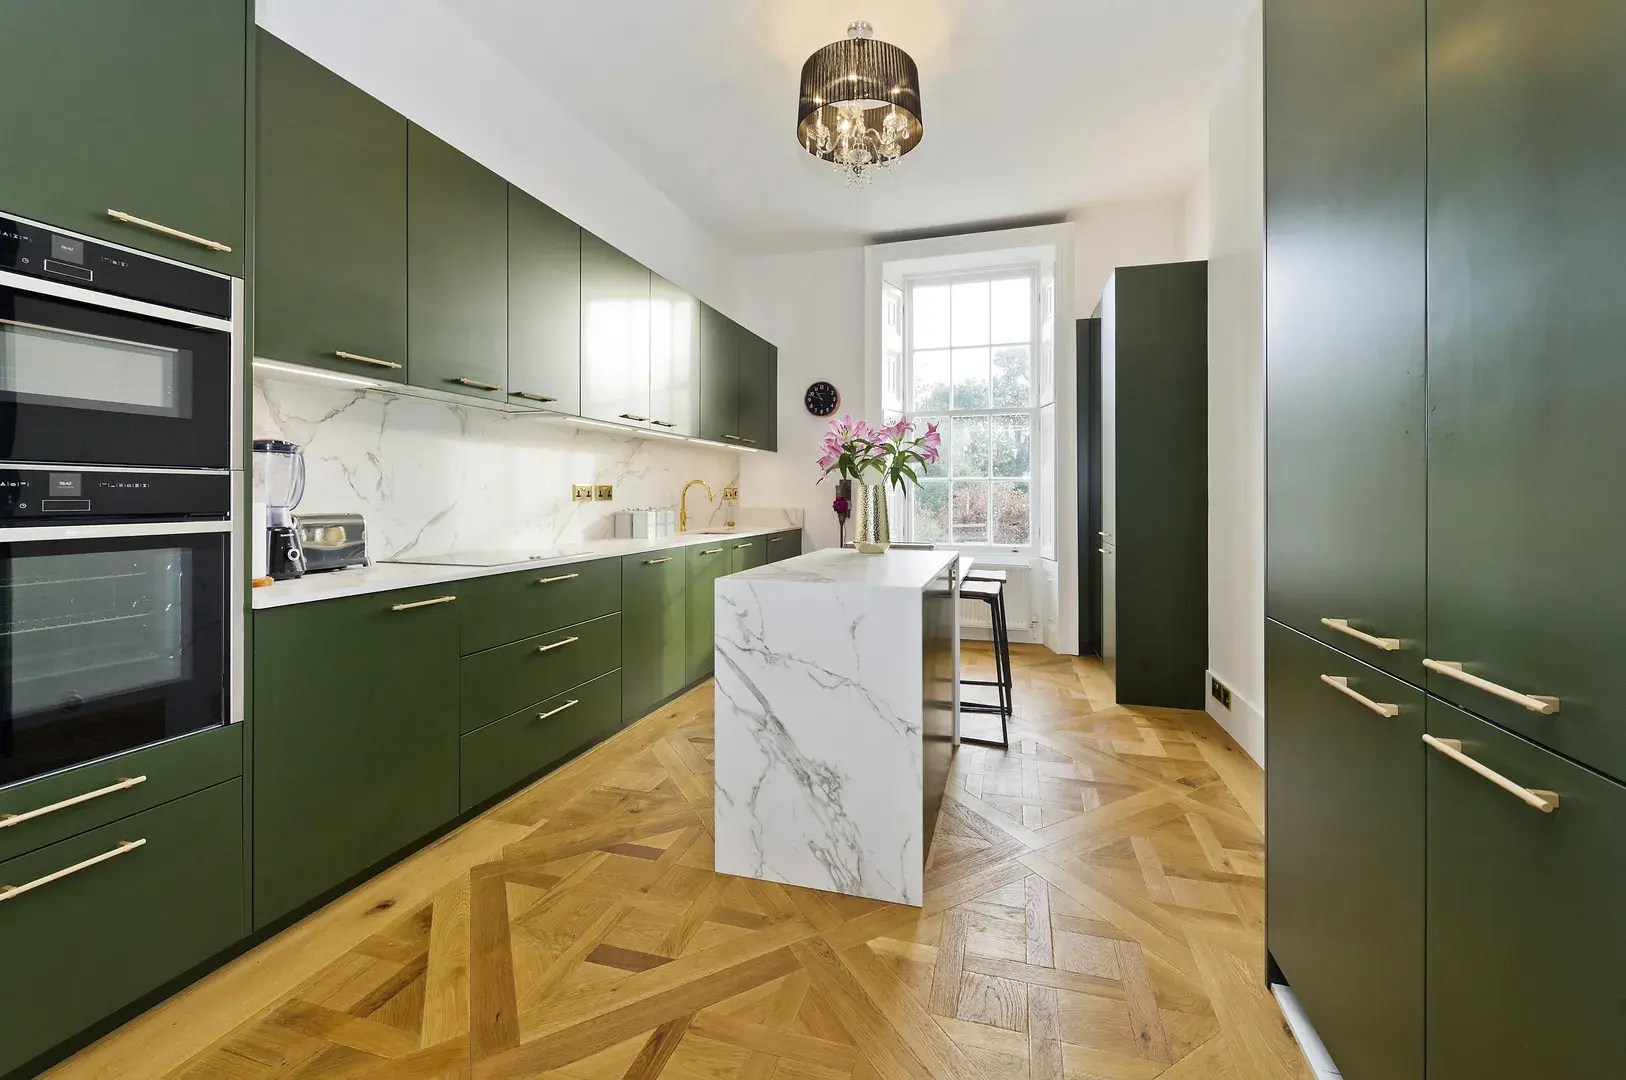 Kings Road, holiday home in Richmond, London